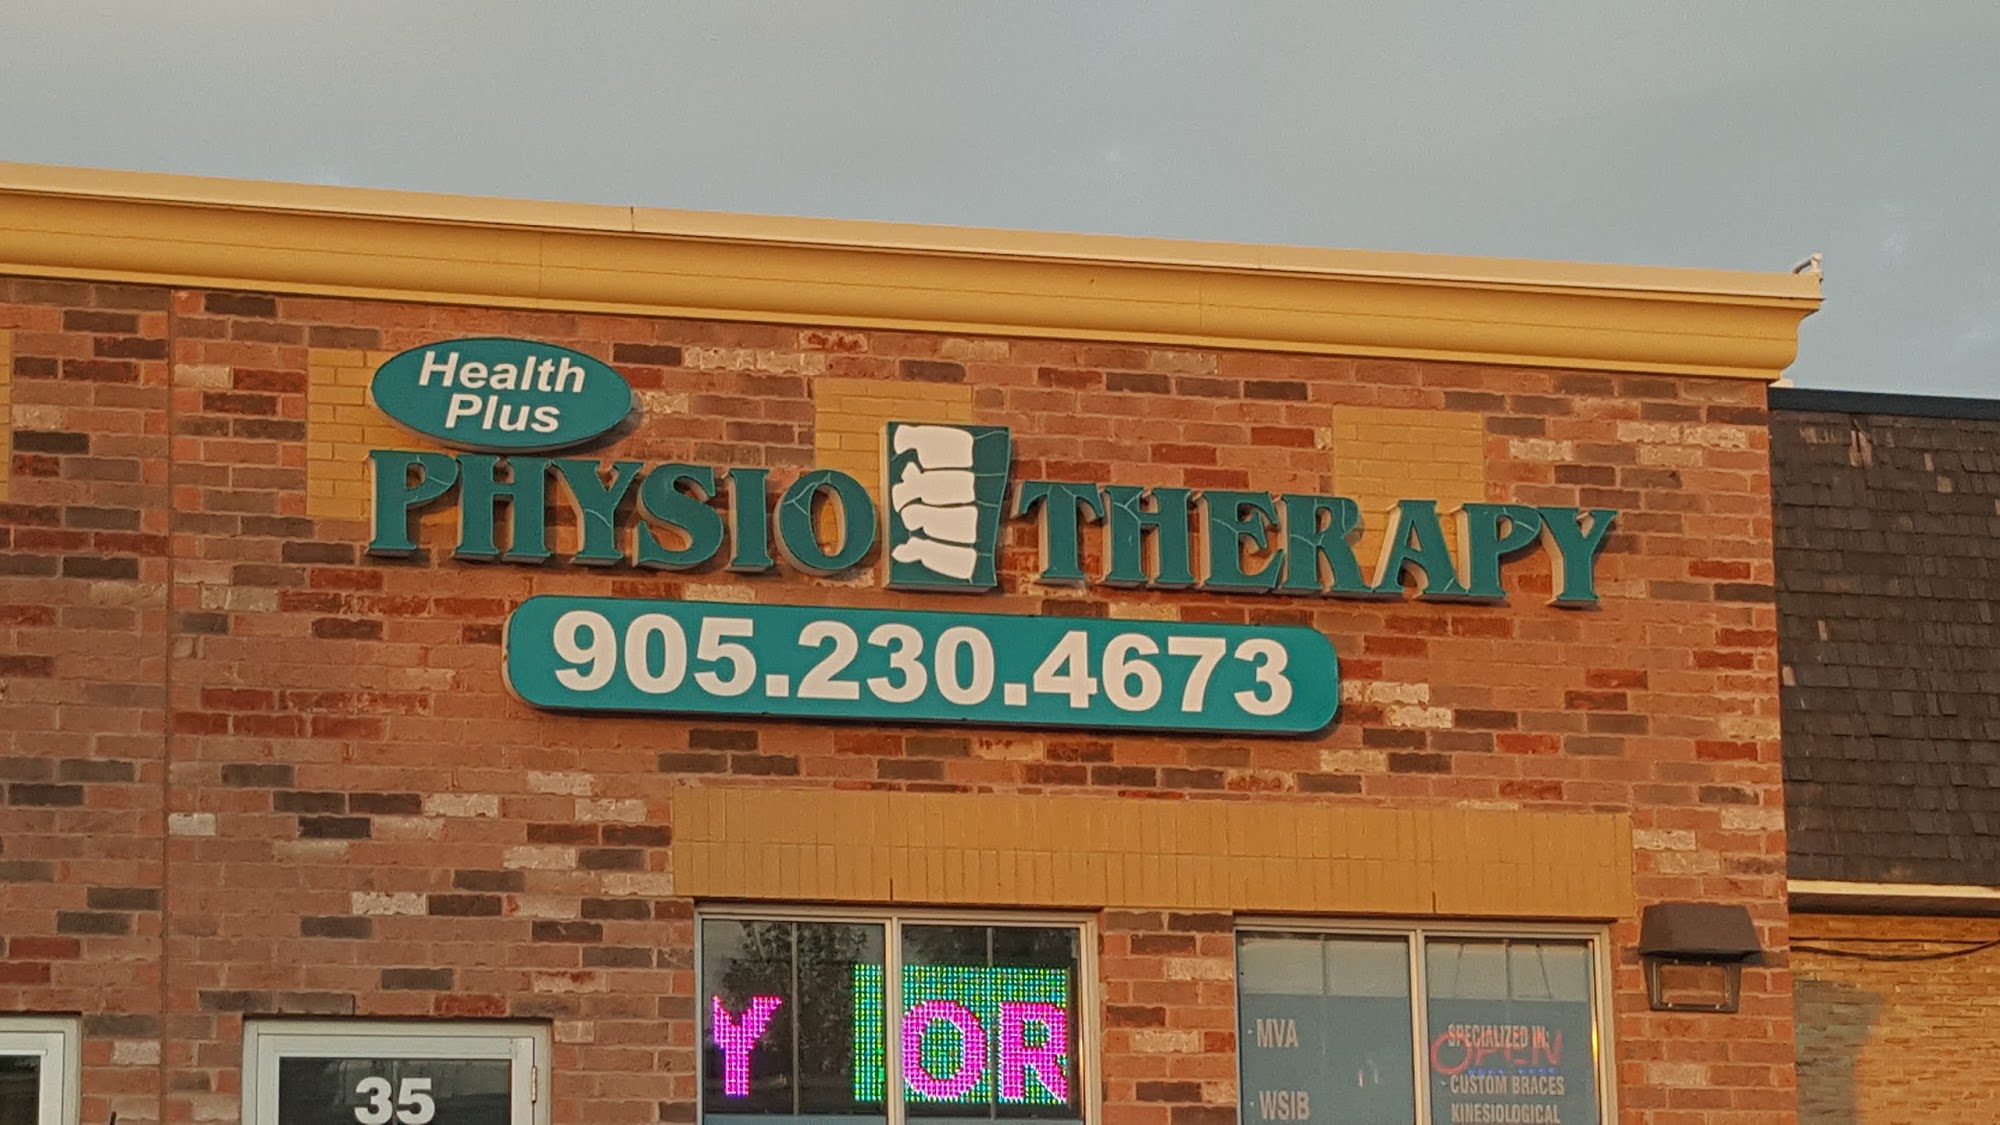 Health Plus Physiotherapy Clinic